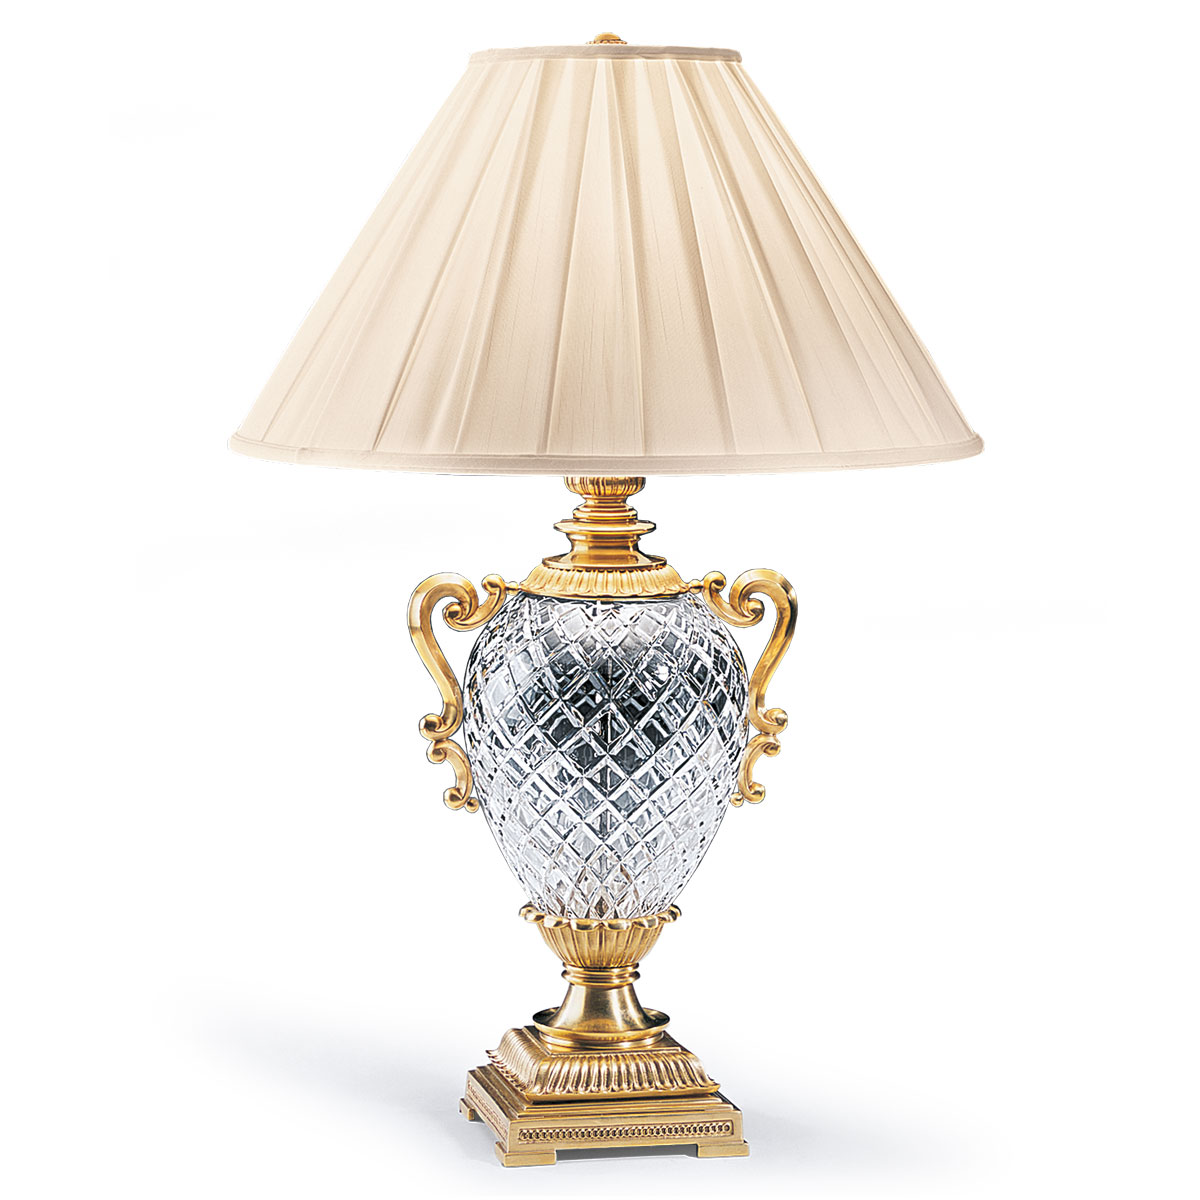 Solid Brass And Cut Crystal Table Lamp, Square Crystal Table Lamps